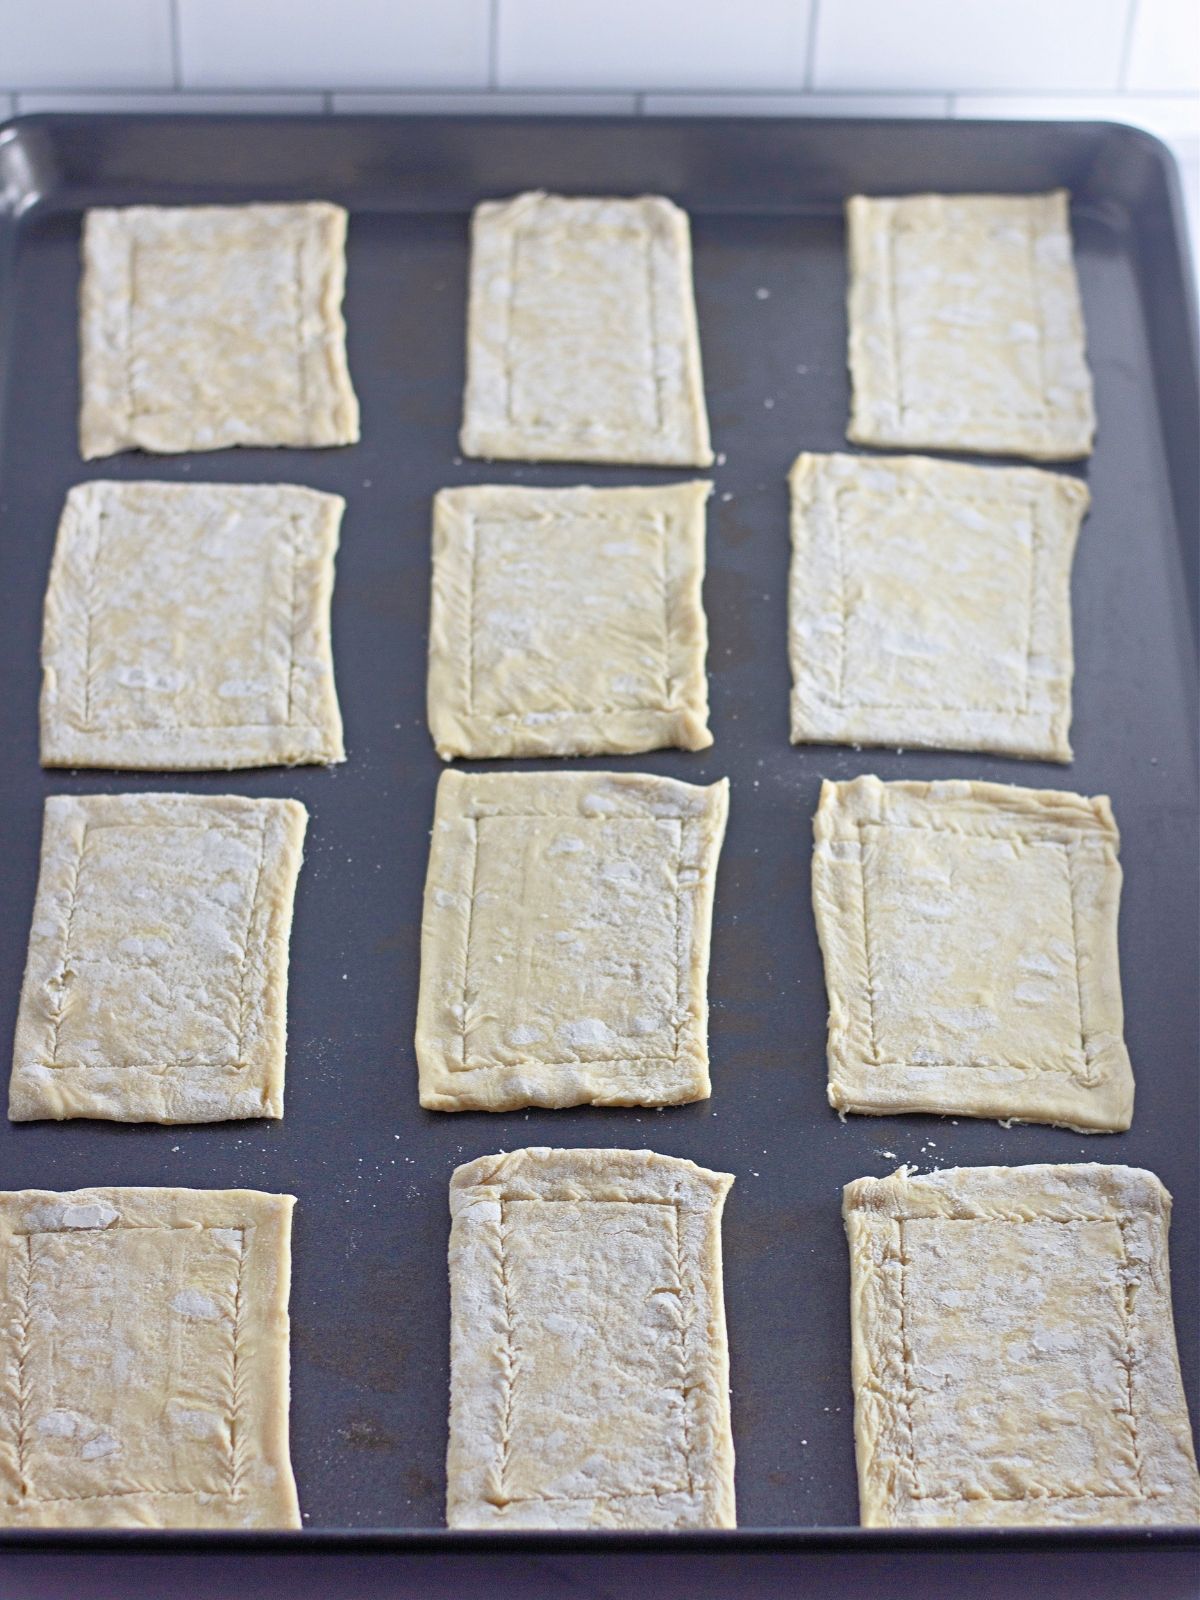 rectangles of puff pastry on baking tray before baking.